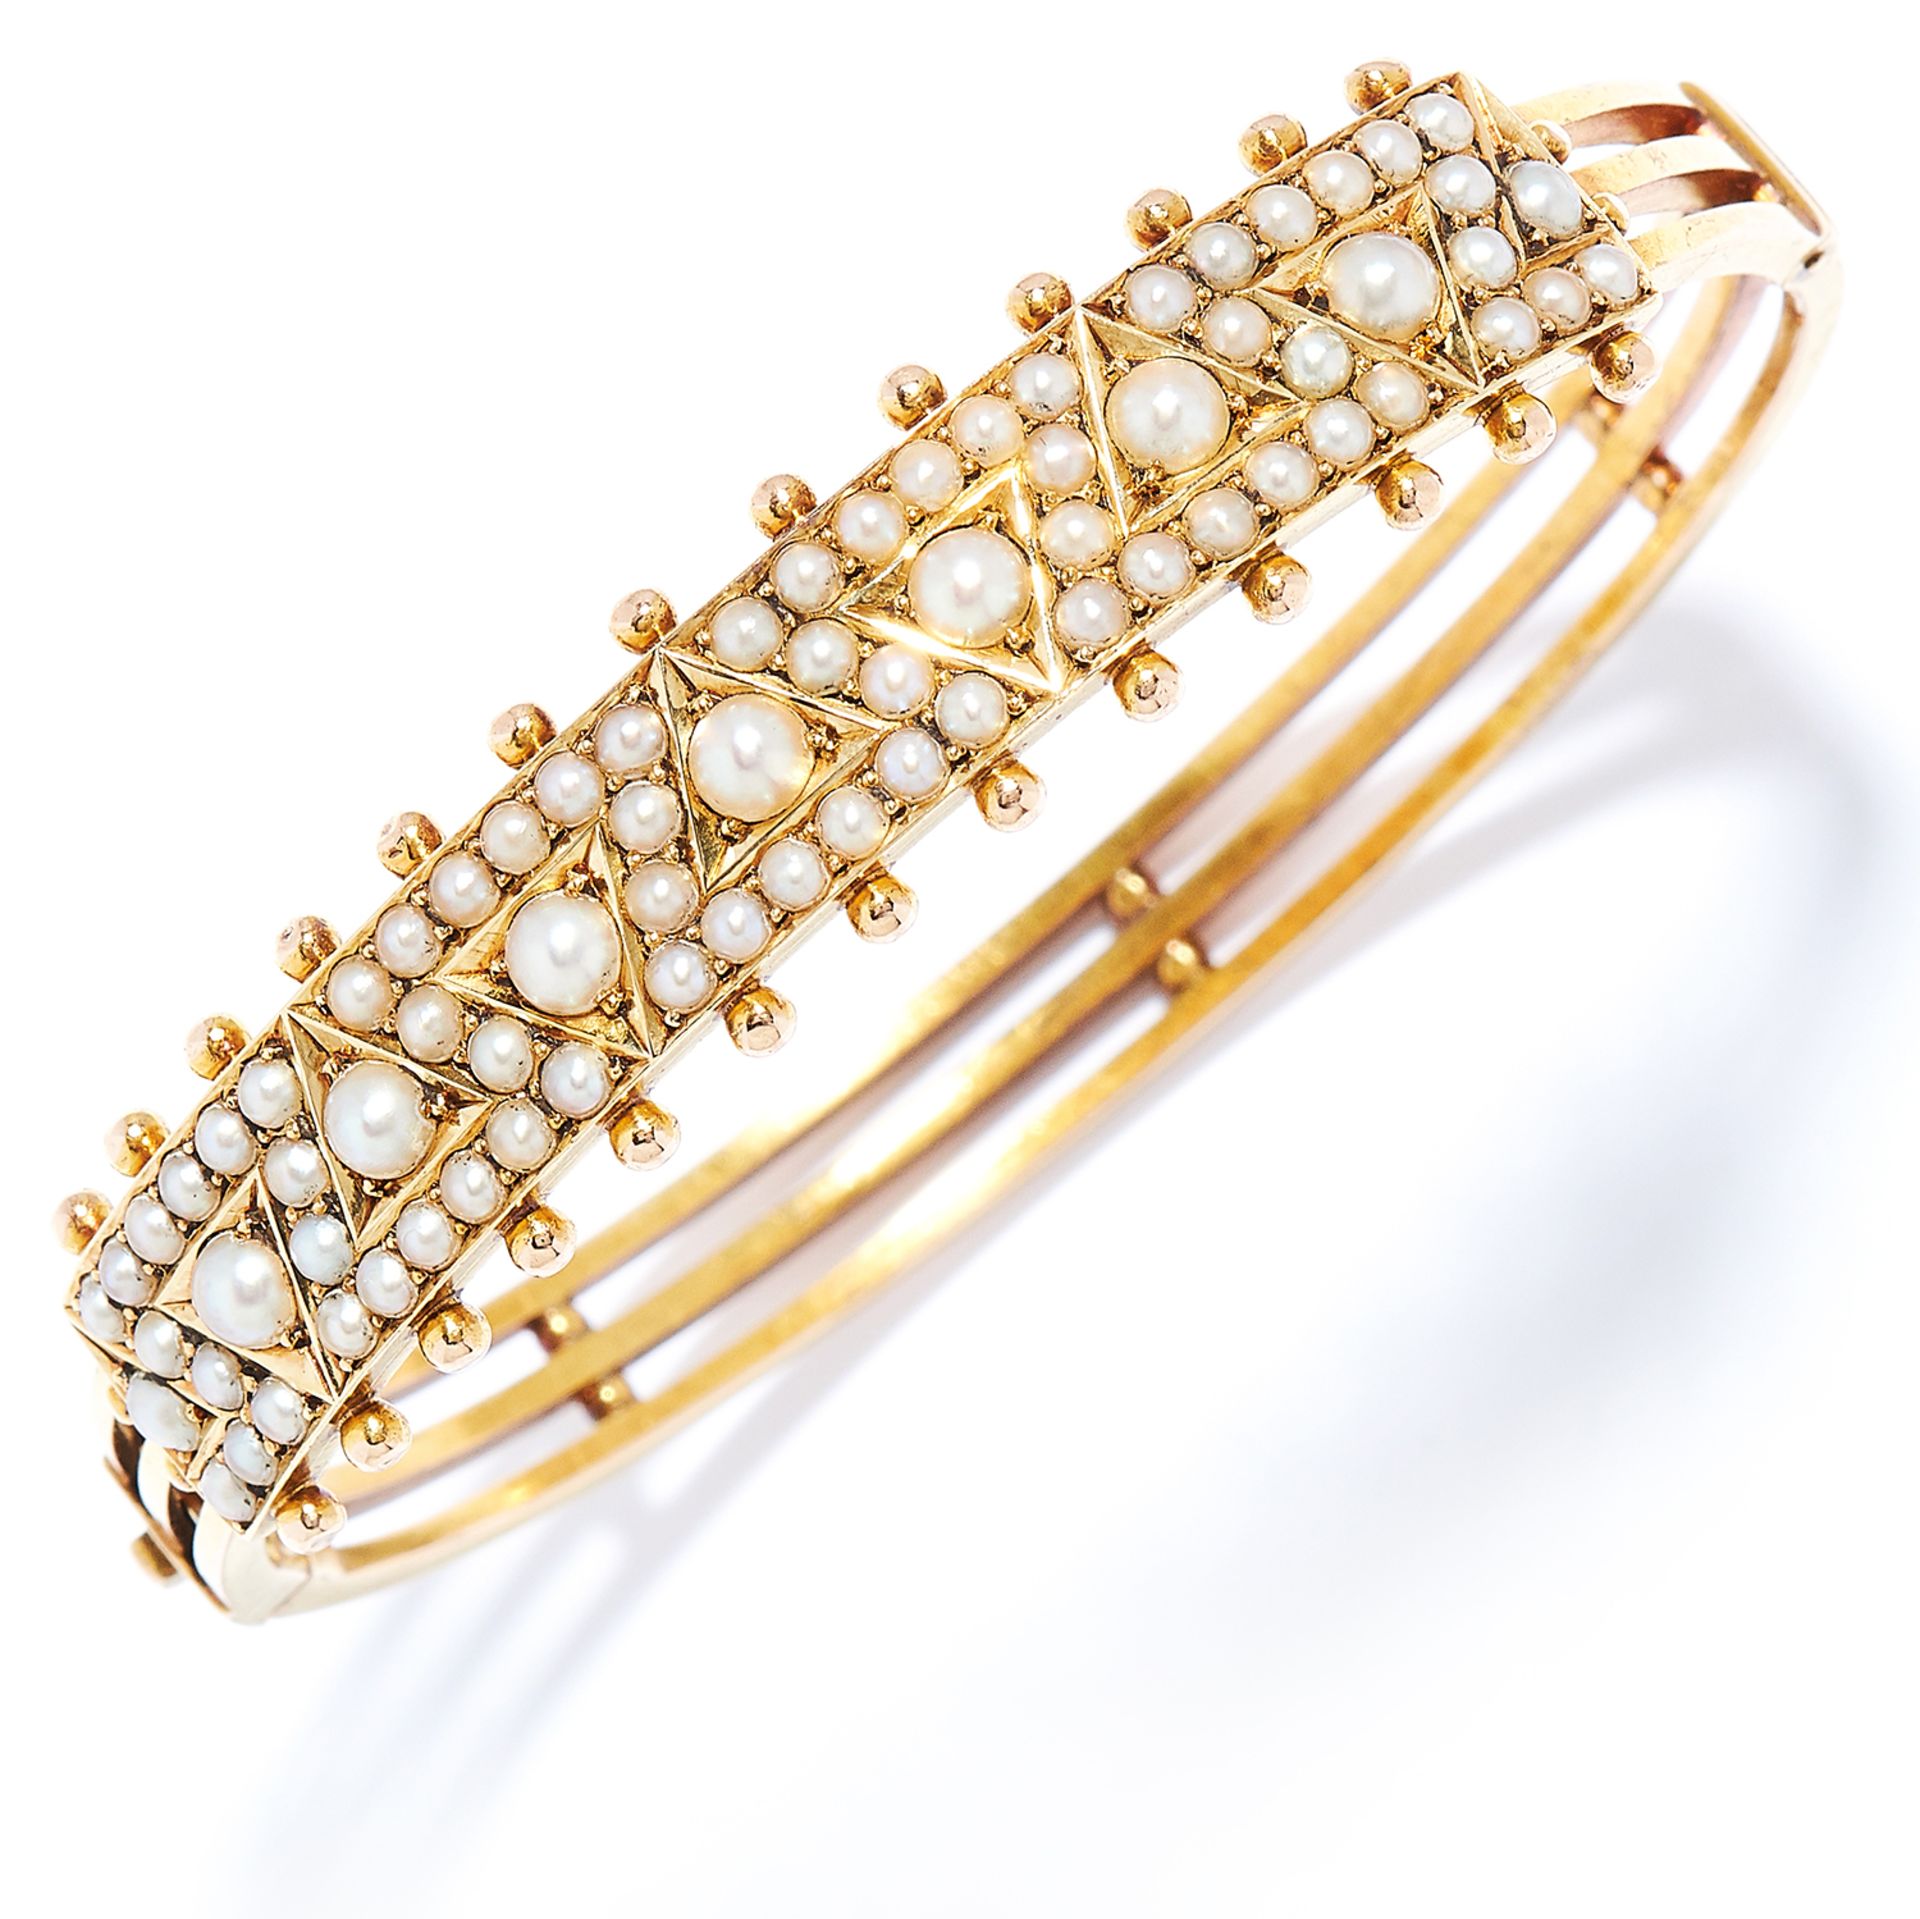 ANTIQUE SEED PEARL BANGLE in high carat yellow gold, set with rows of seed pearls, unmarked, 5.5cm